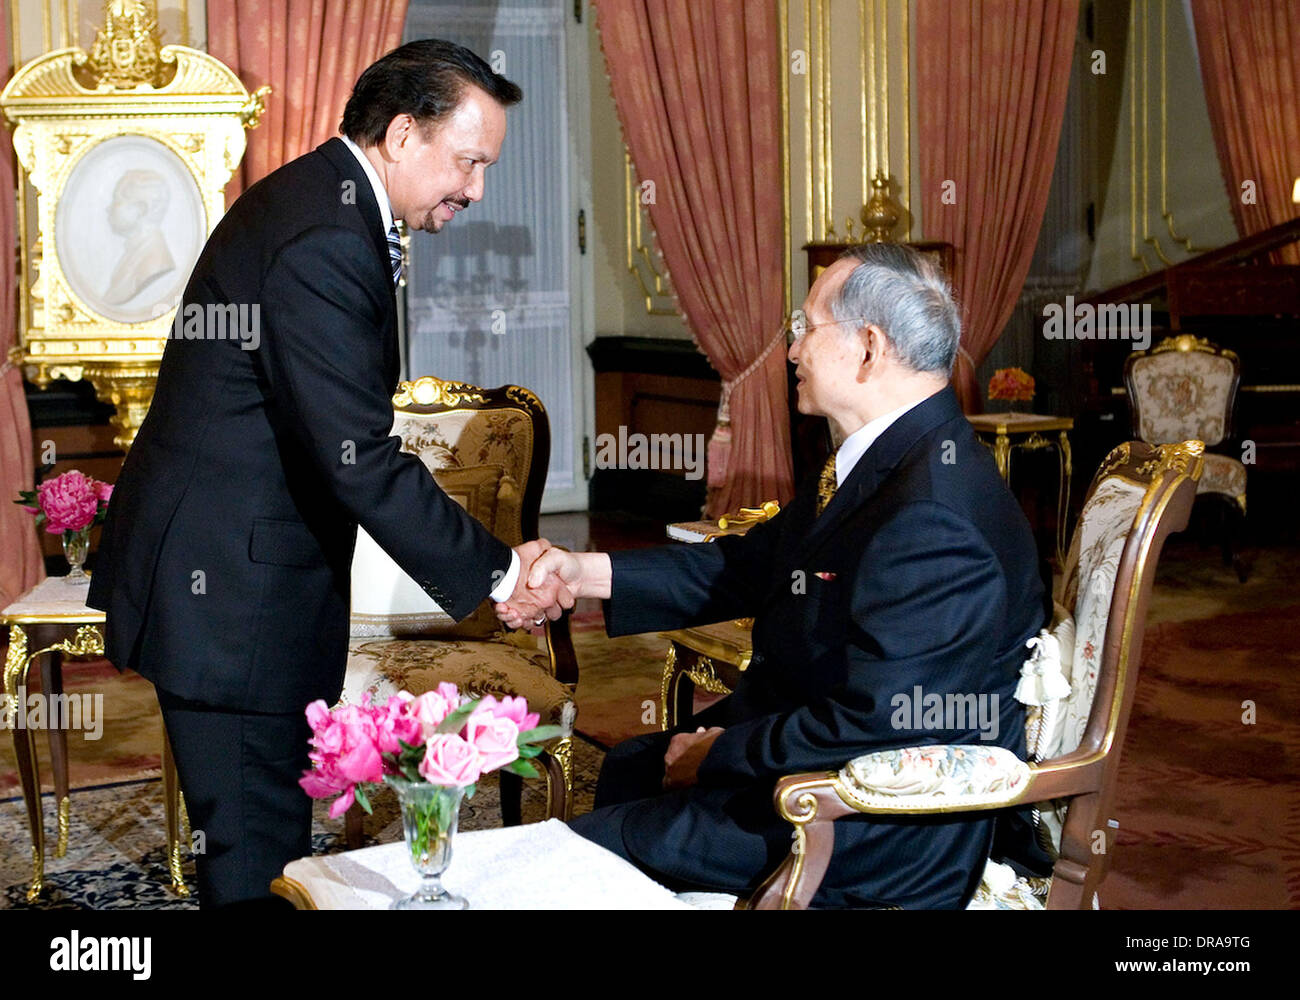 The Sultan of Brunei and His Majesty Bhumibol Adulyadej, the King of Thailand at the Grand Palace in Bangkok during a state visit in Thailand Bangkok, Thailand - 29.06.12 Stock Photo